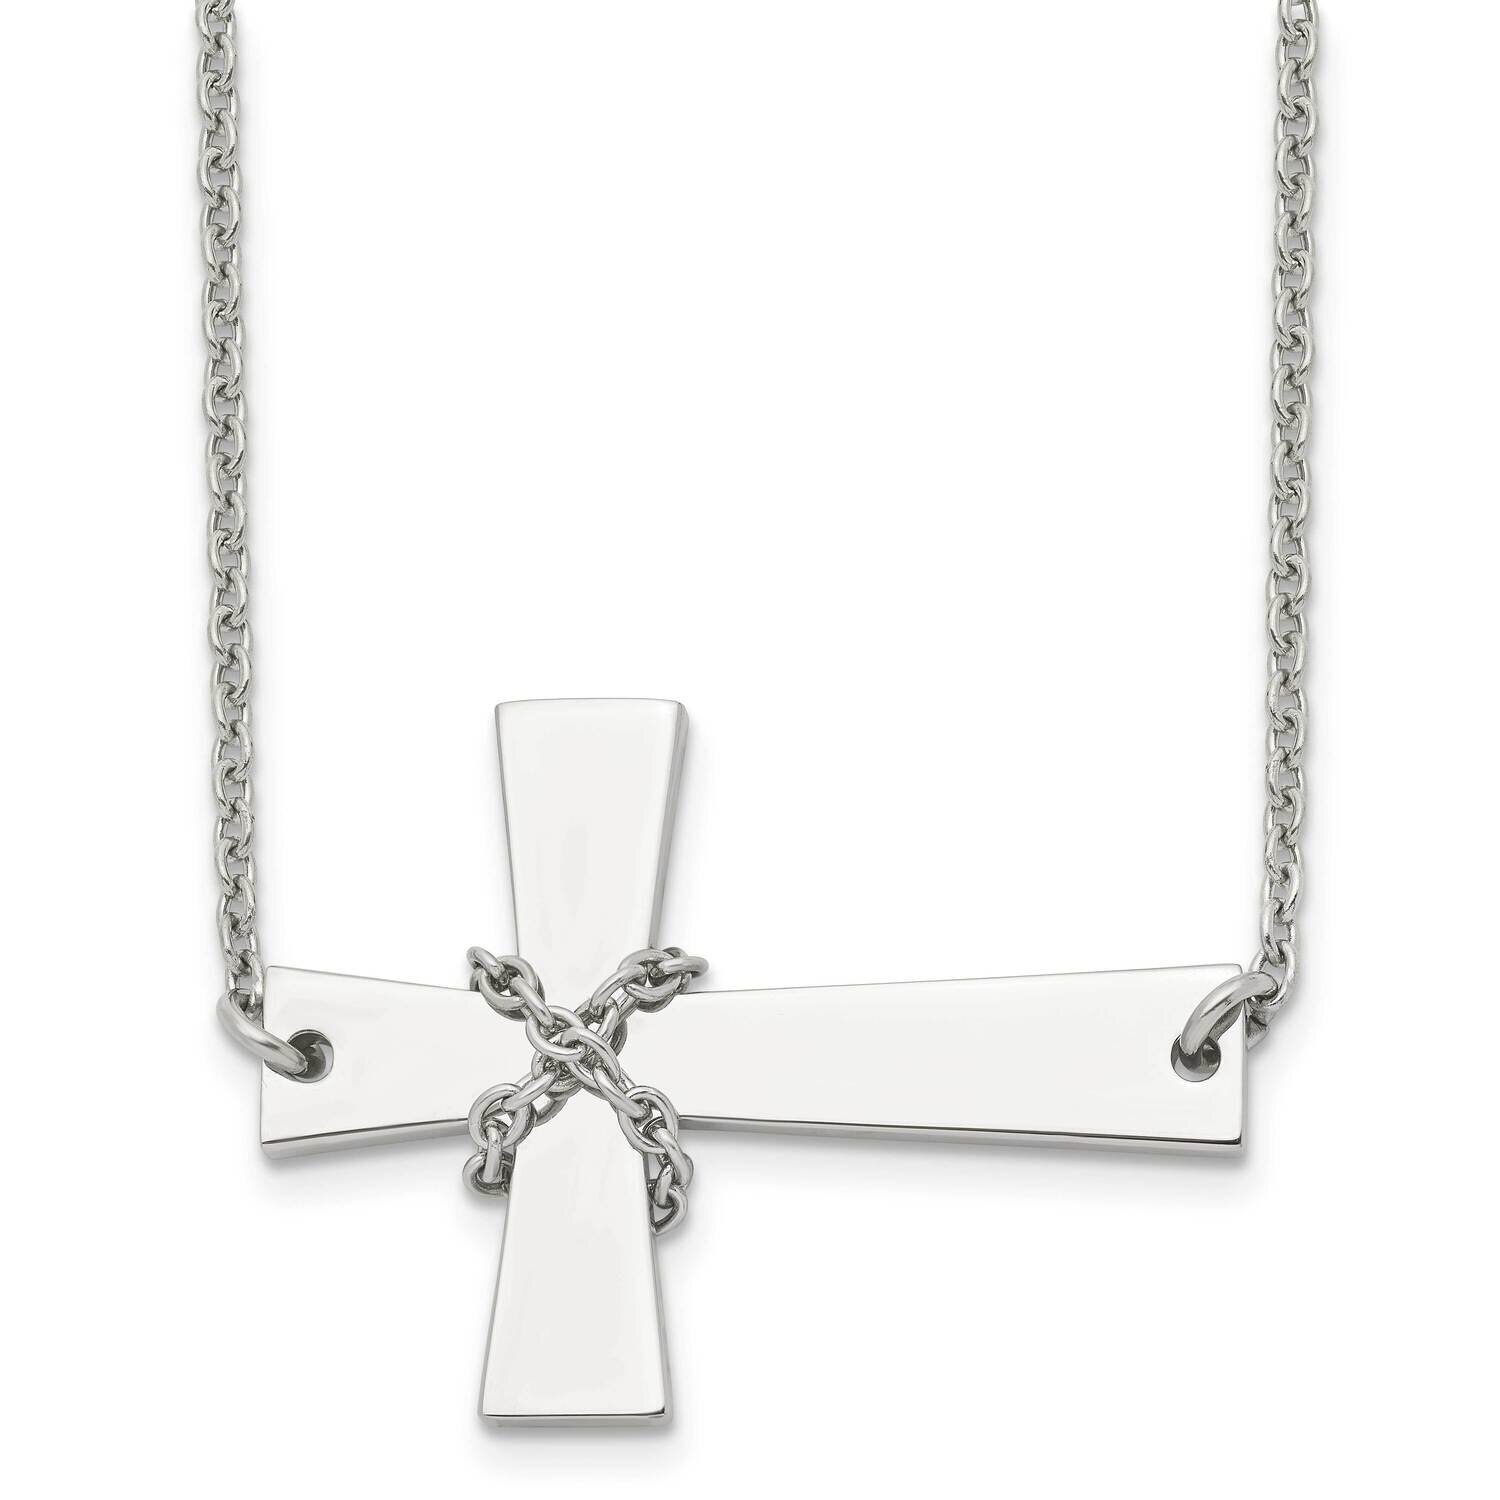 Sideways Cross with Chain 21 Inch Necklace Stainless Steel Polished SRN1186-21